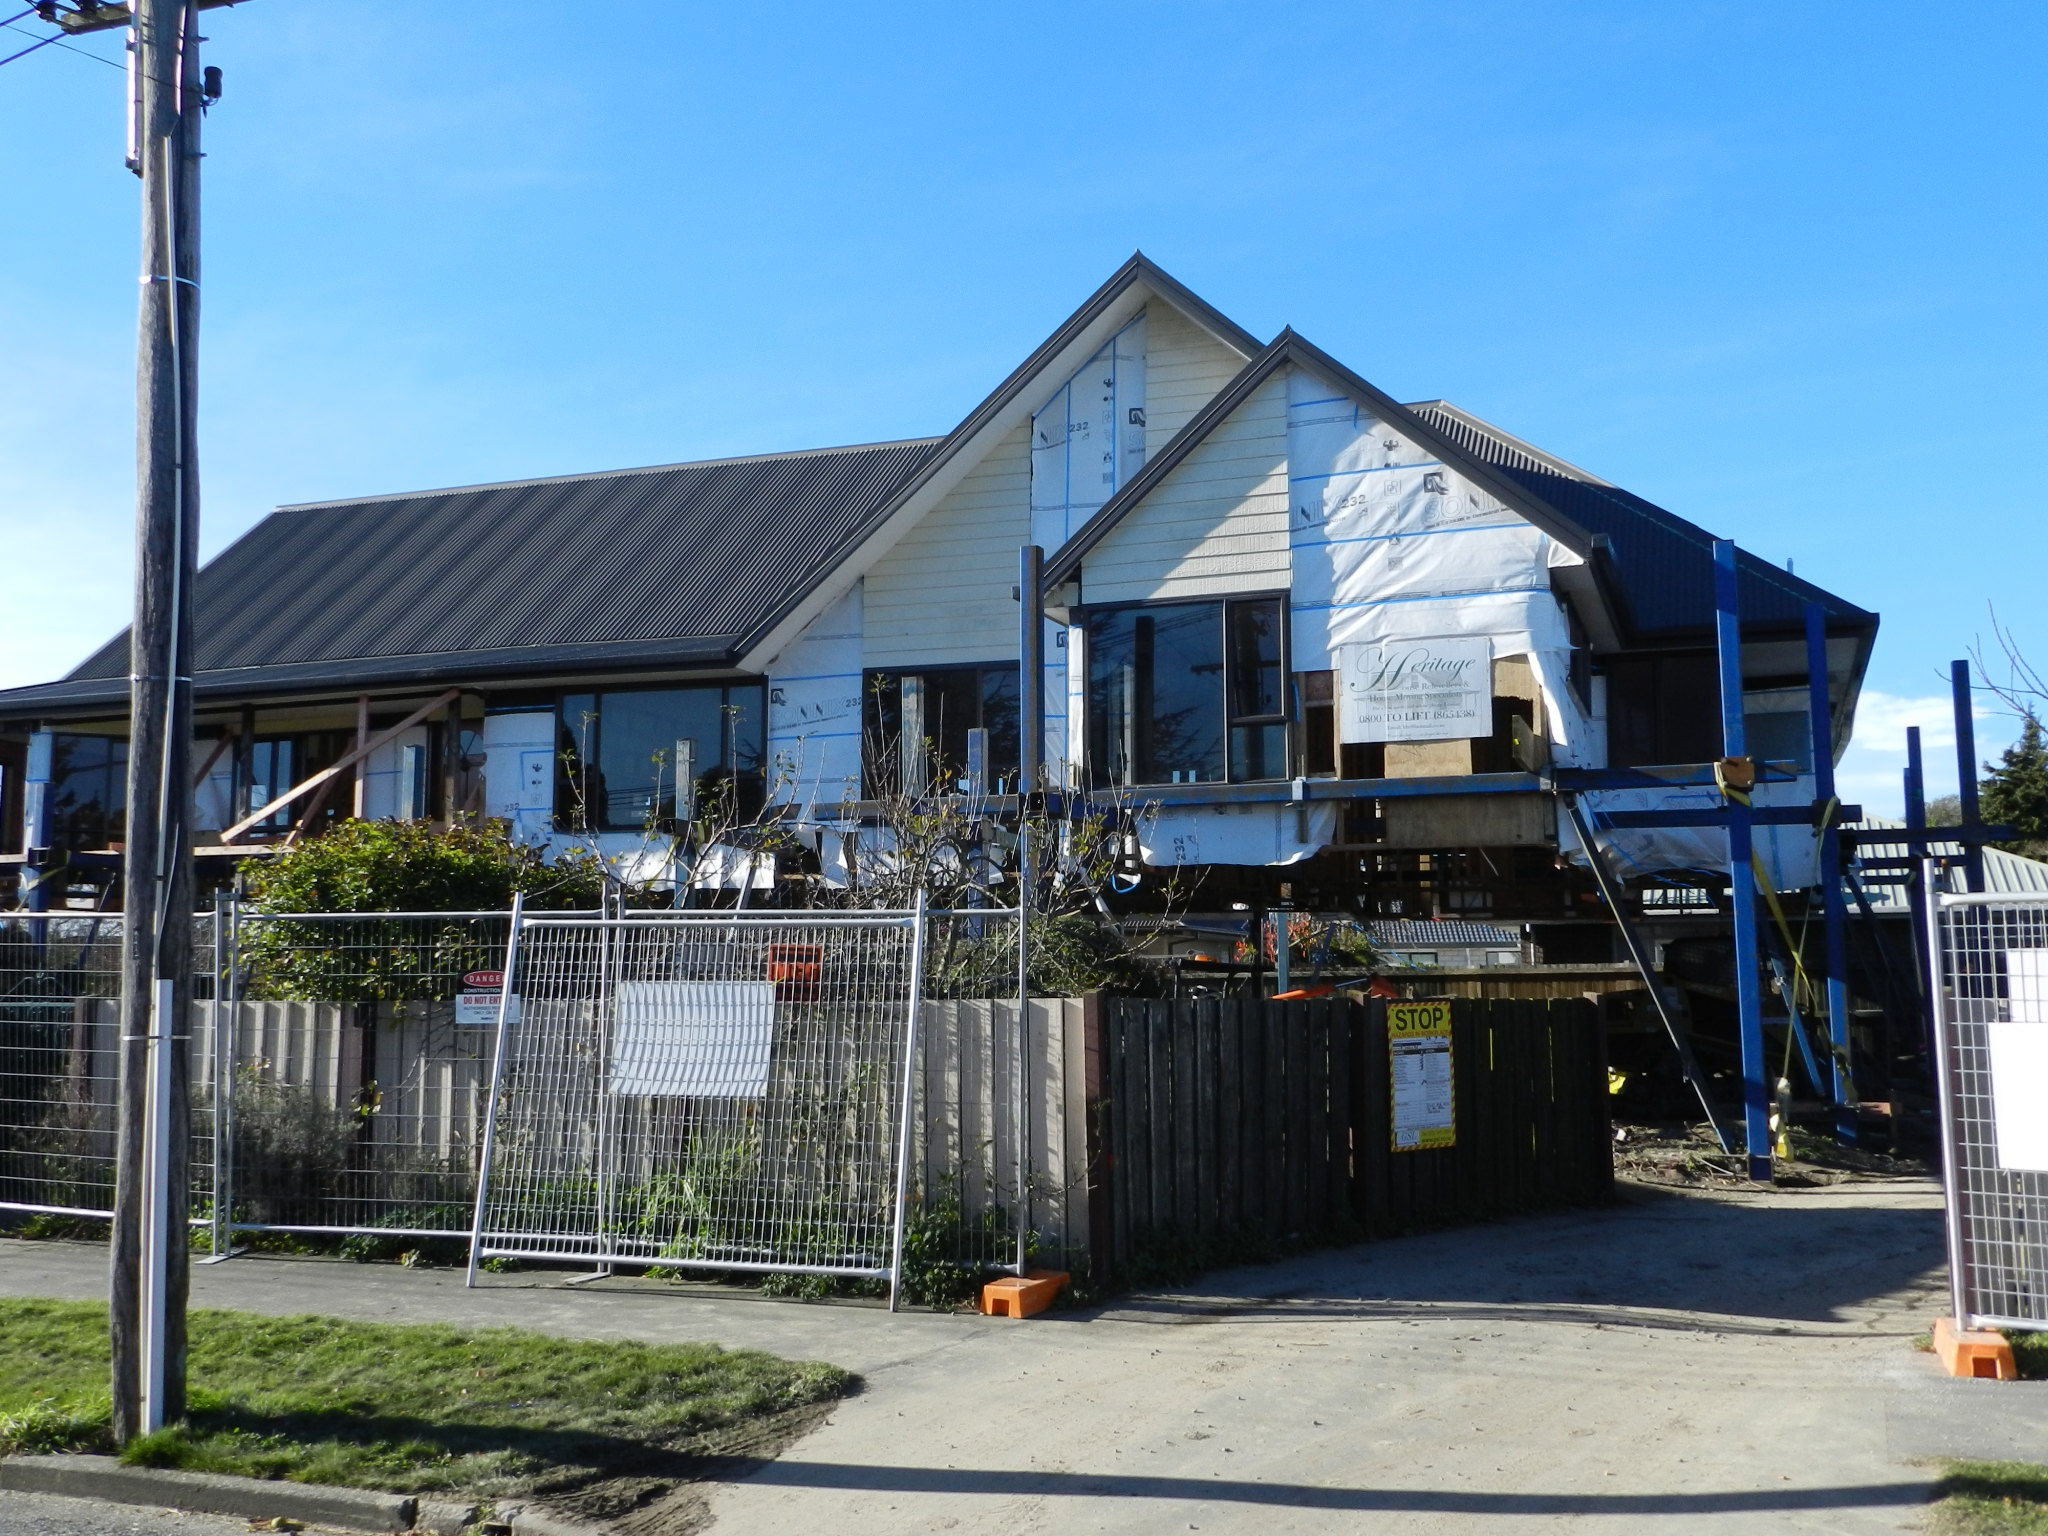 House lifting and foundation repair service in Canterbury